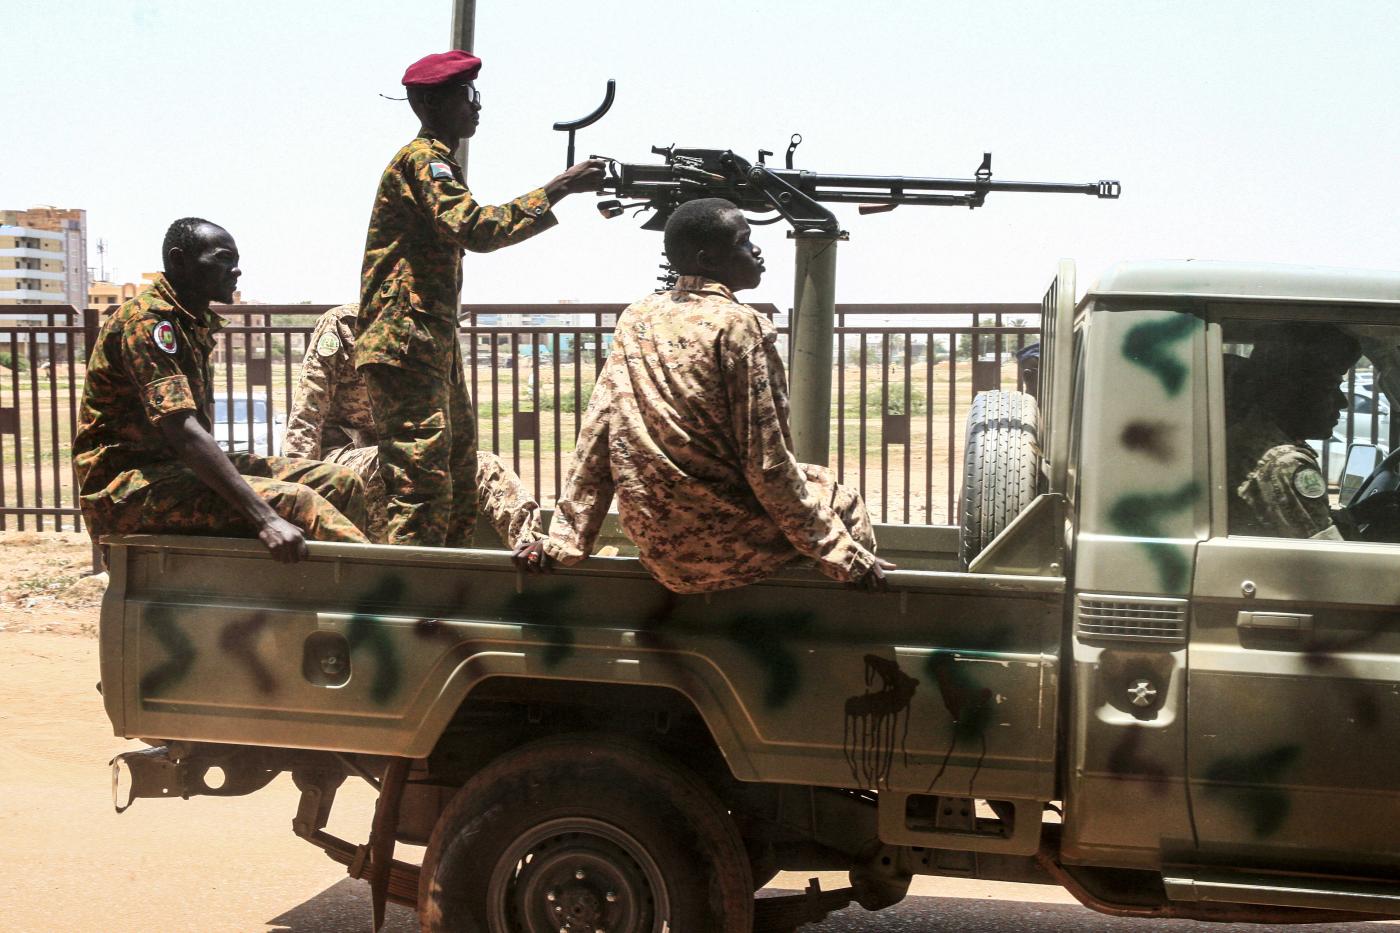 Sudanese soldiers seen in a convoy escorting Bashir back to prison after his appearance in court in Khartoum in August, 2019.